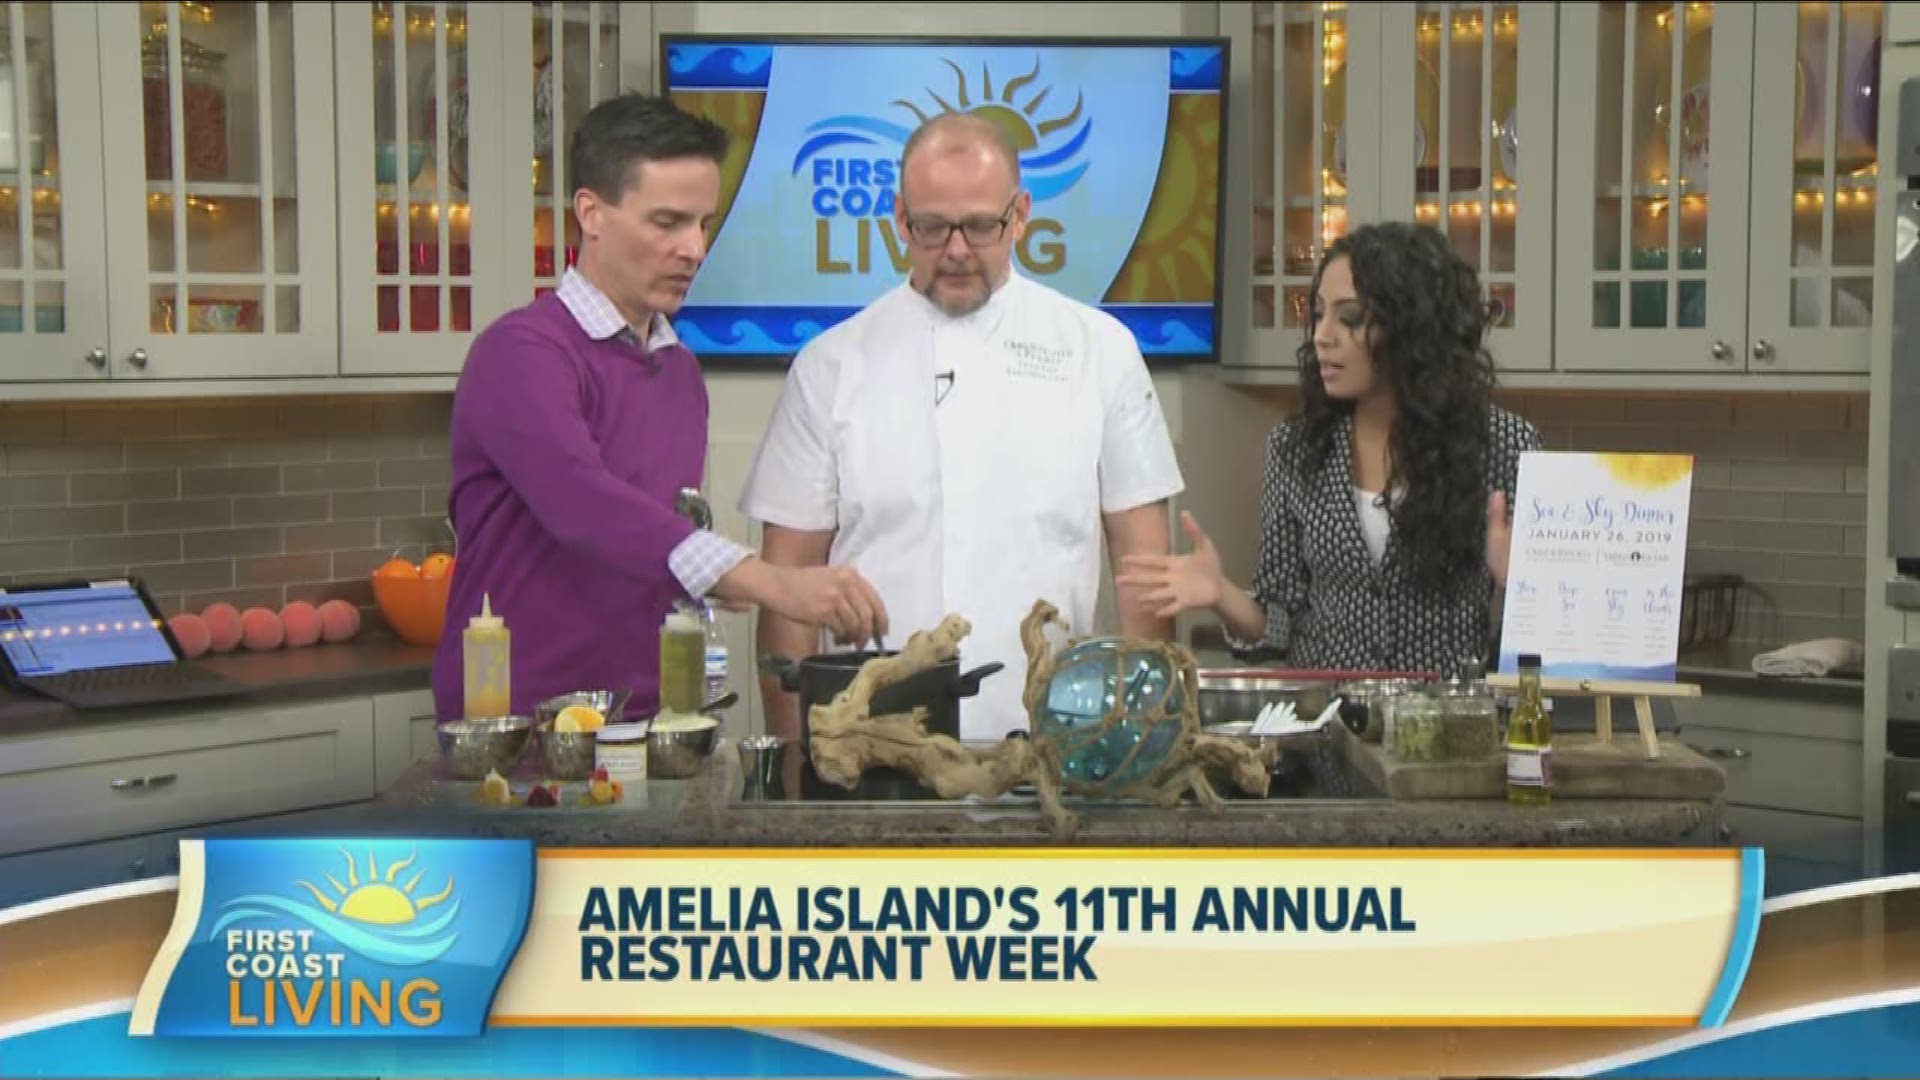 Want a taste of what's to come at Amelia Island Restaurant Week? Take a look!